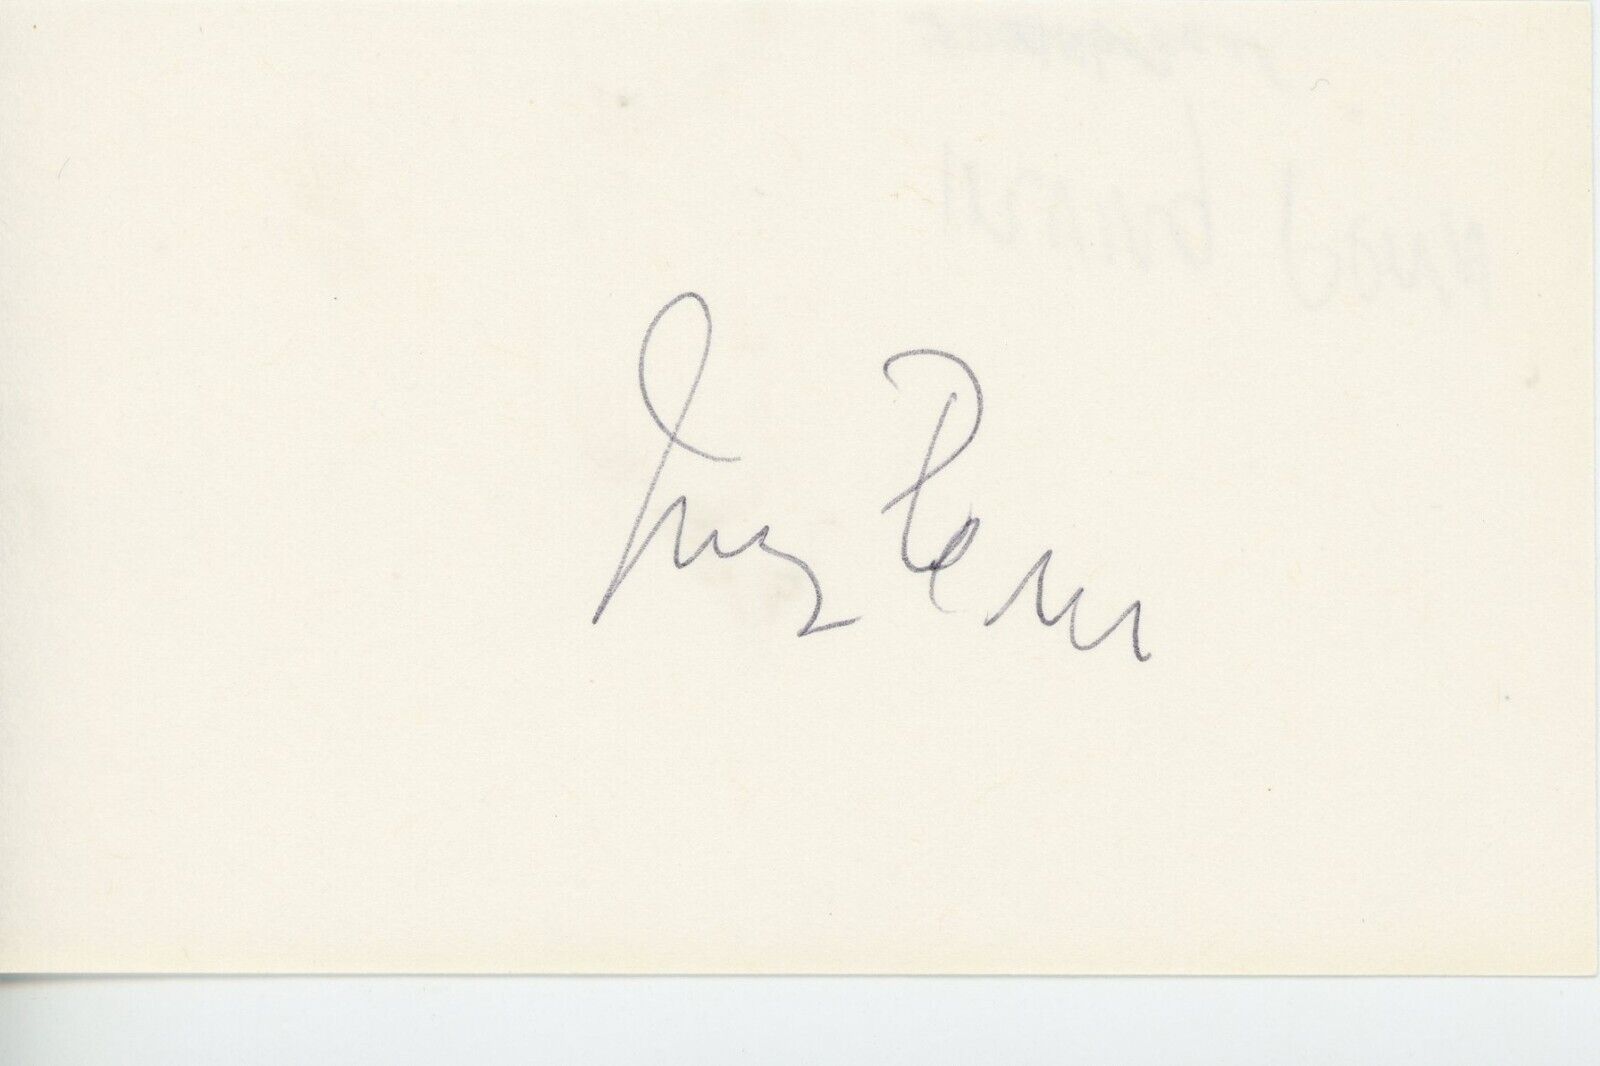 Famed Photographer Irving Penn and his autograph